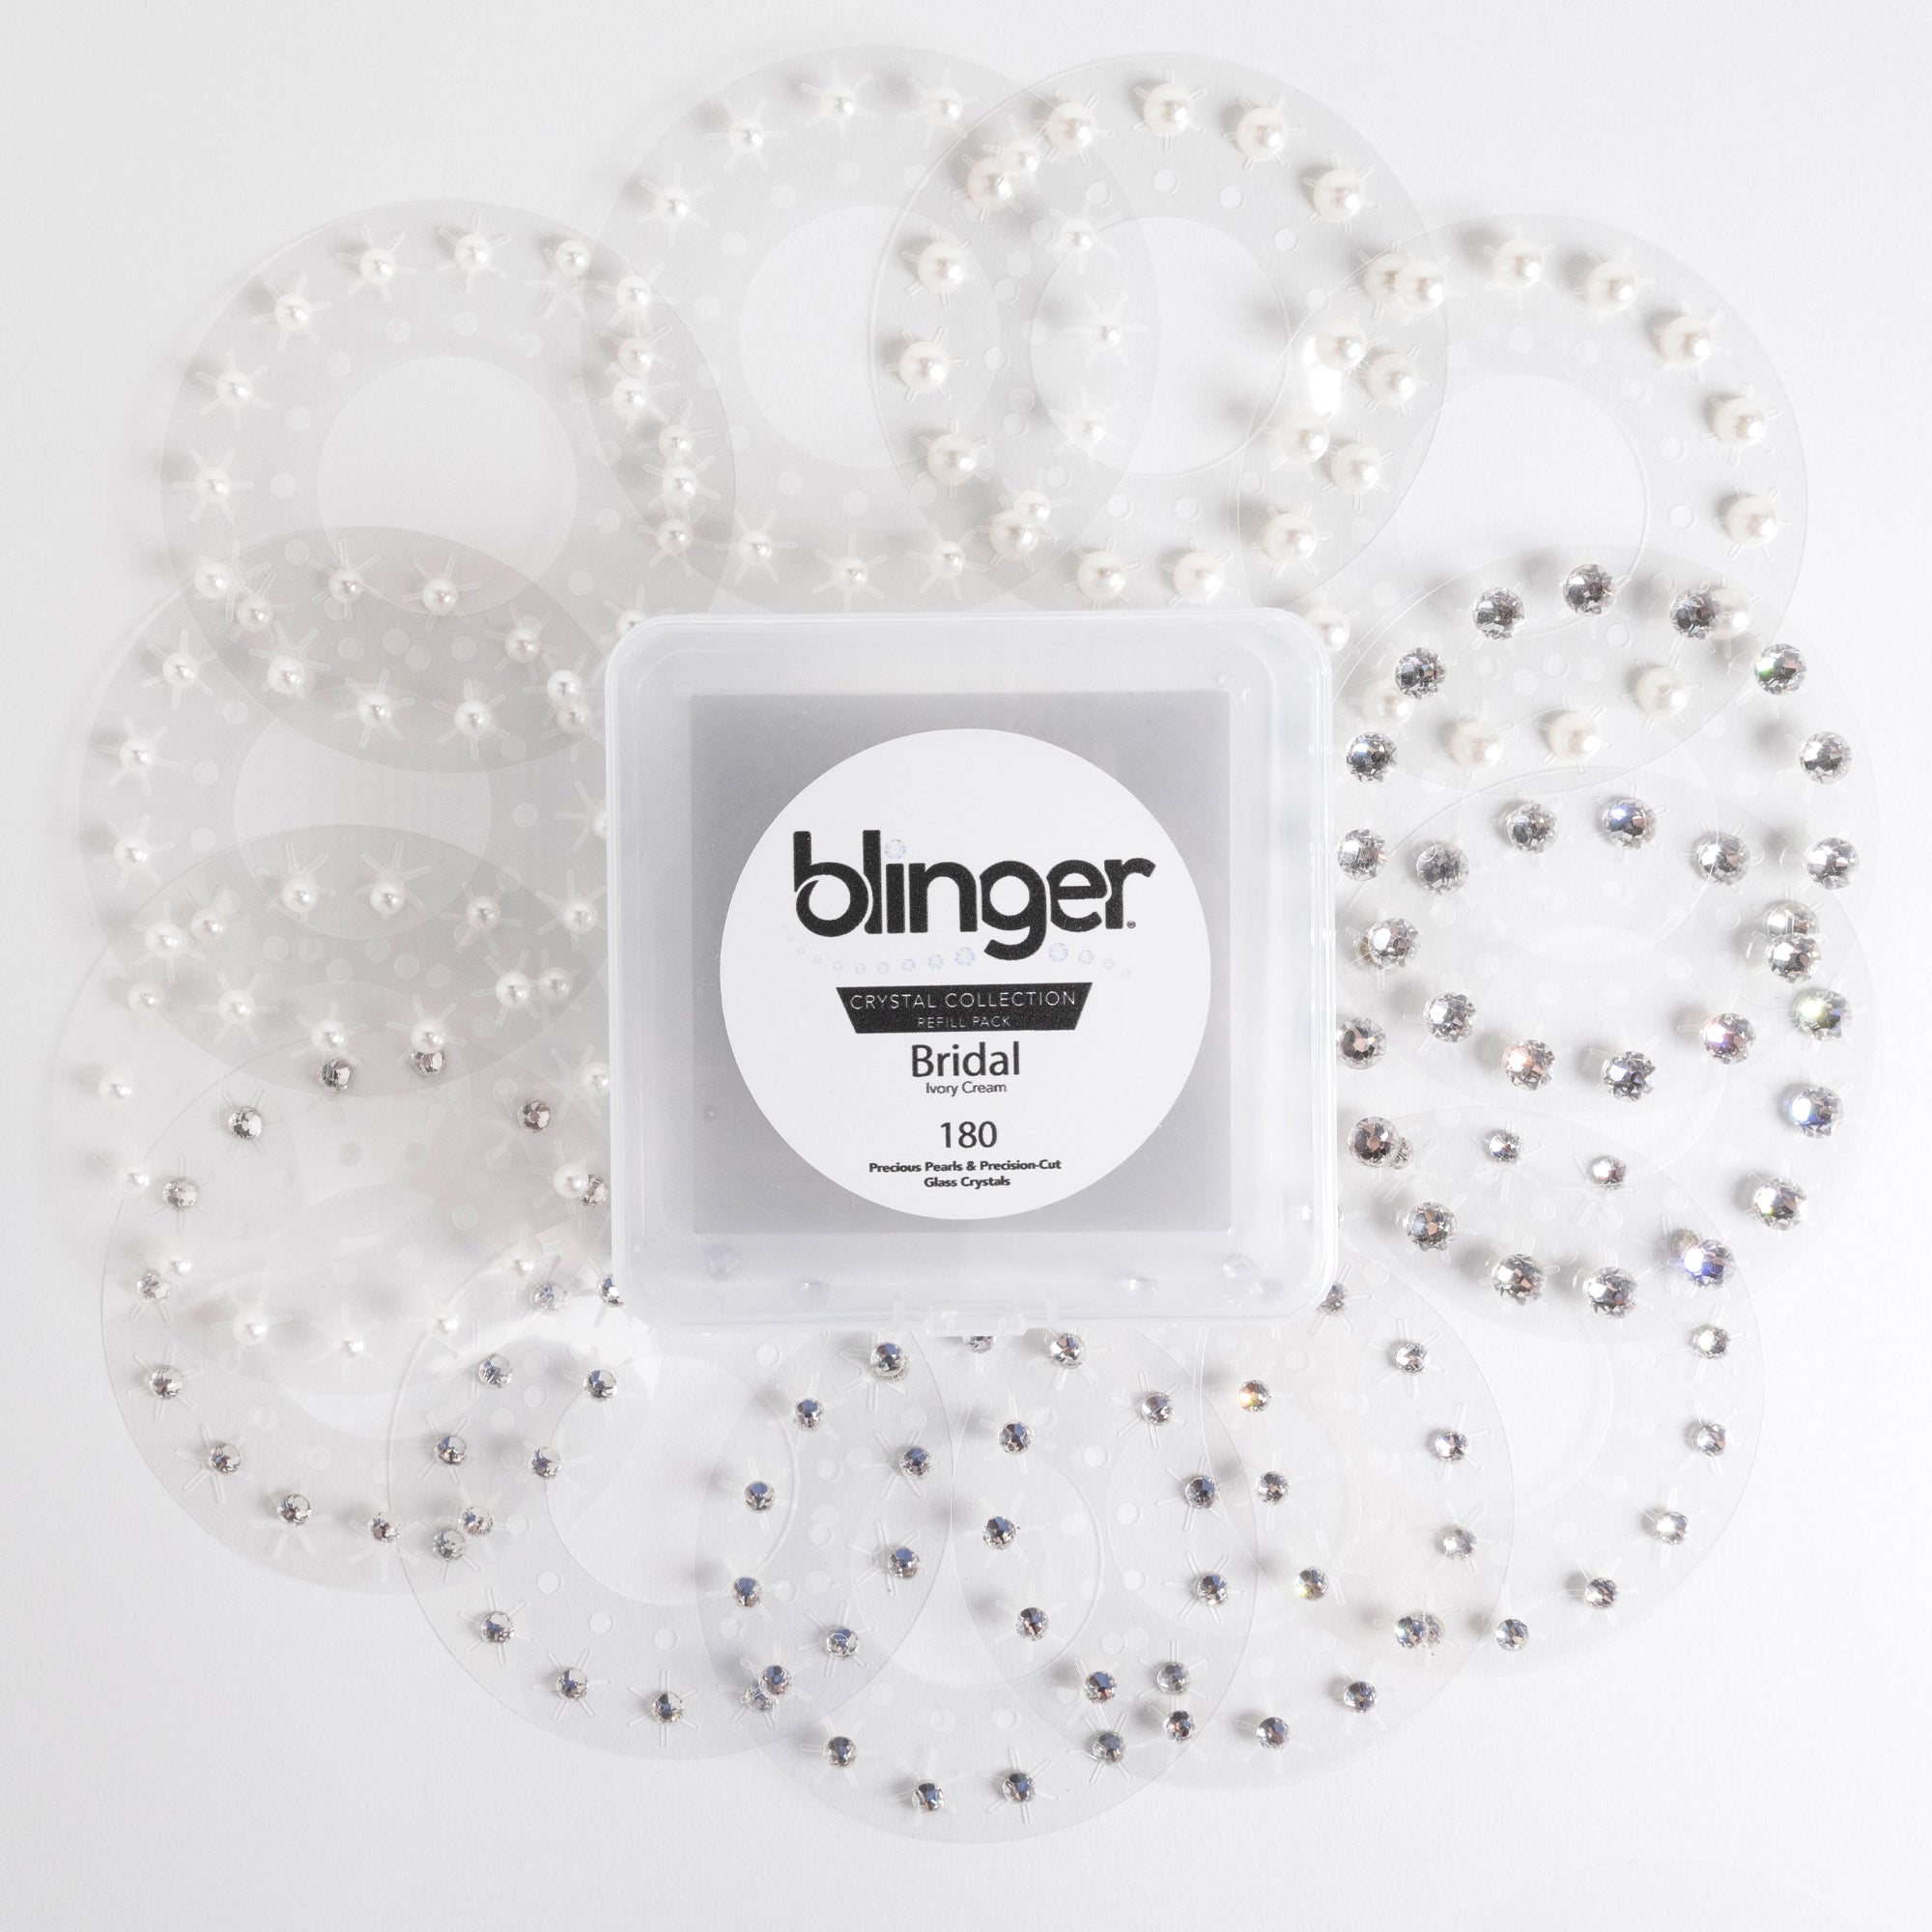 Blinger Glimmer Refill Pack | 5 Discs - 75 Precision-Cut Glass Crystals |  Bedazzling Hair Gems | Hair-Safe Adhesive - Bling In Brush Out | Works with